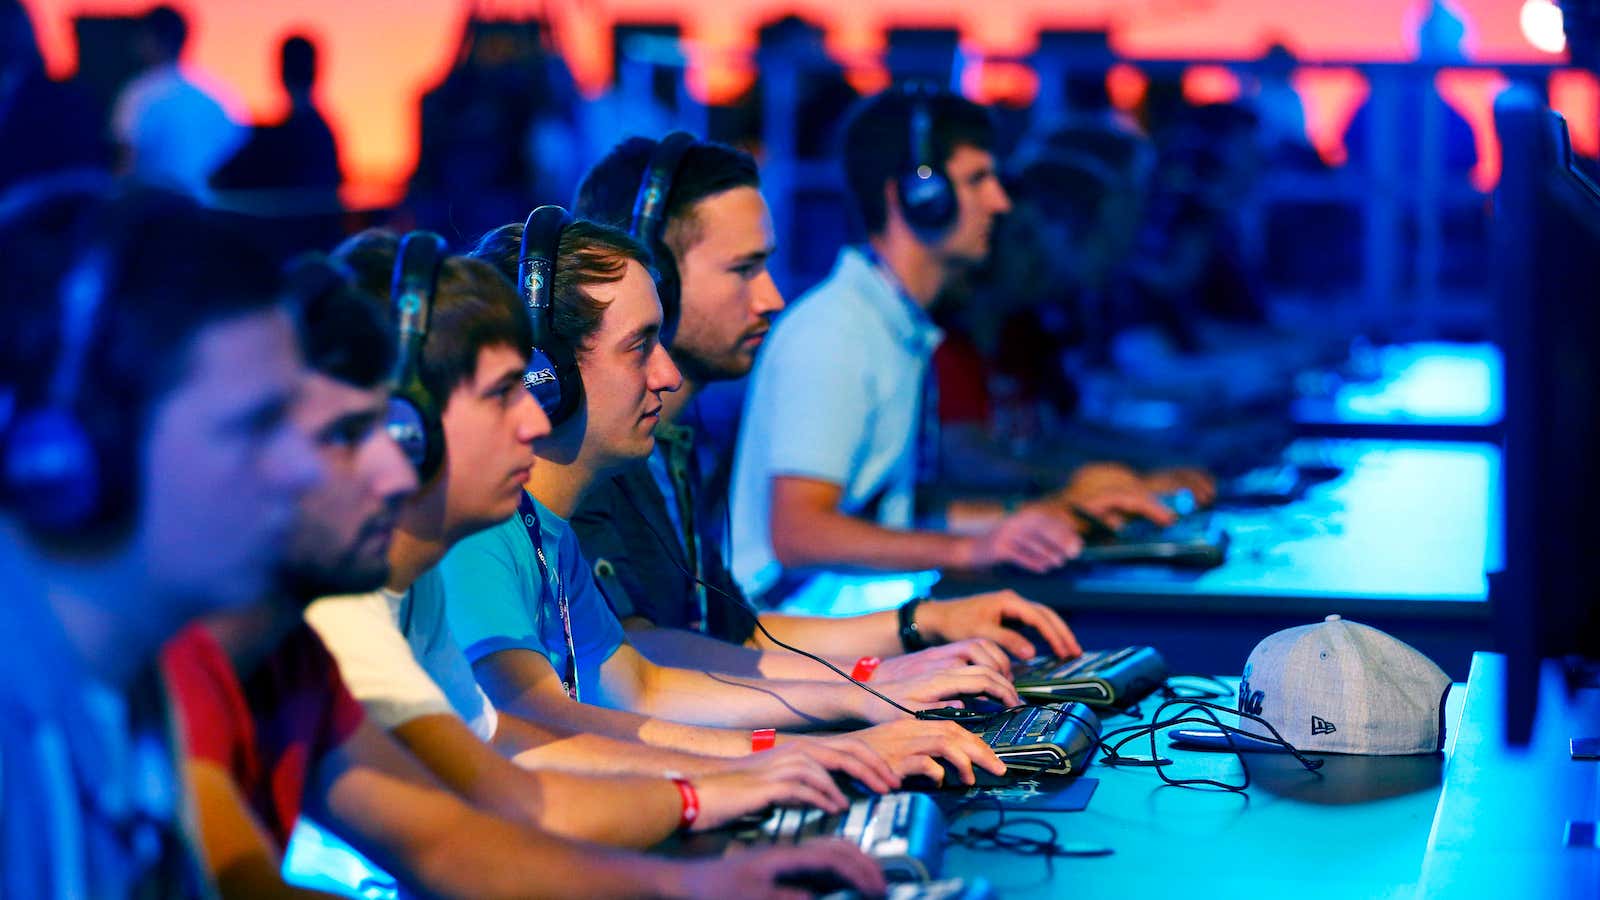 Playing video games is good for your brain – here's how